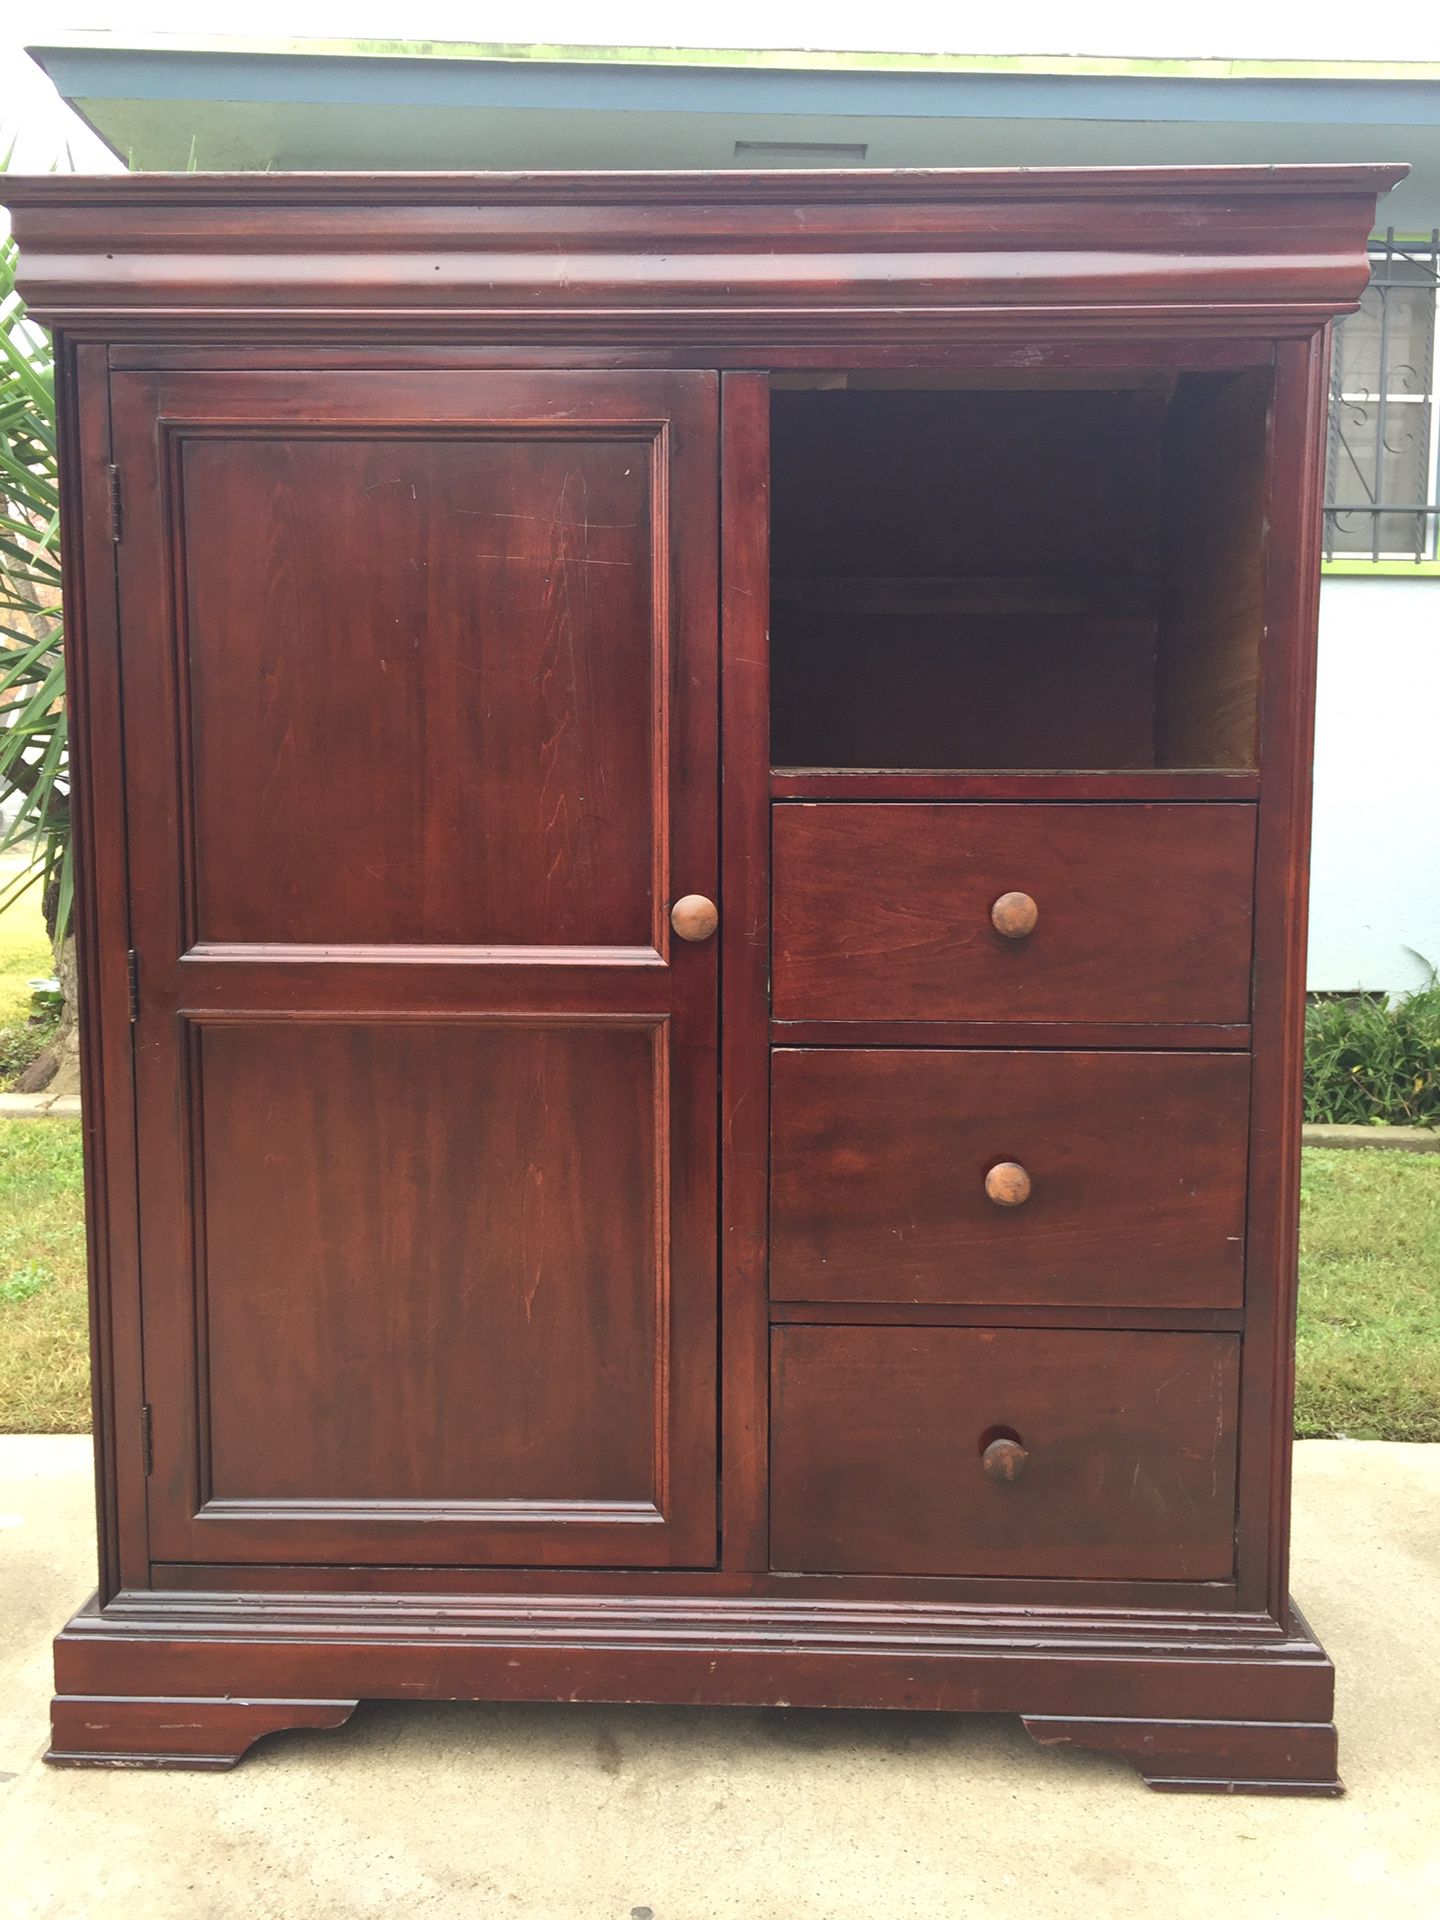 Cabinet with shelf and three drawers in good condition.